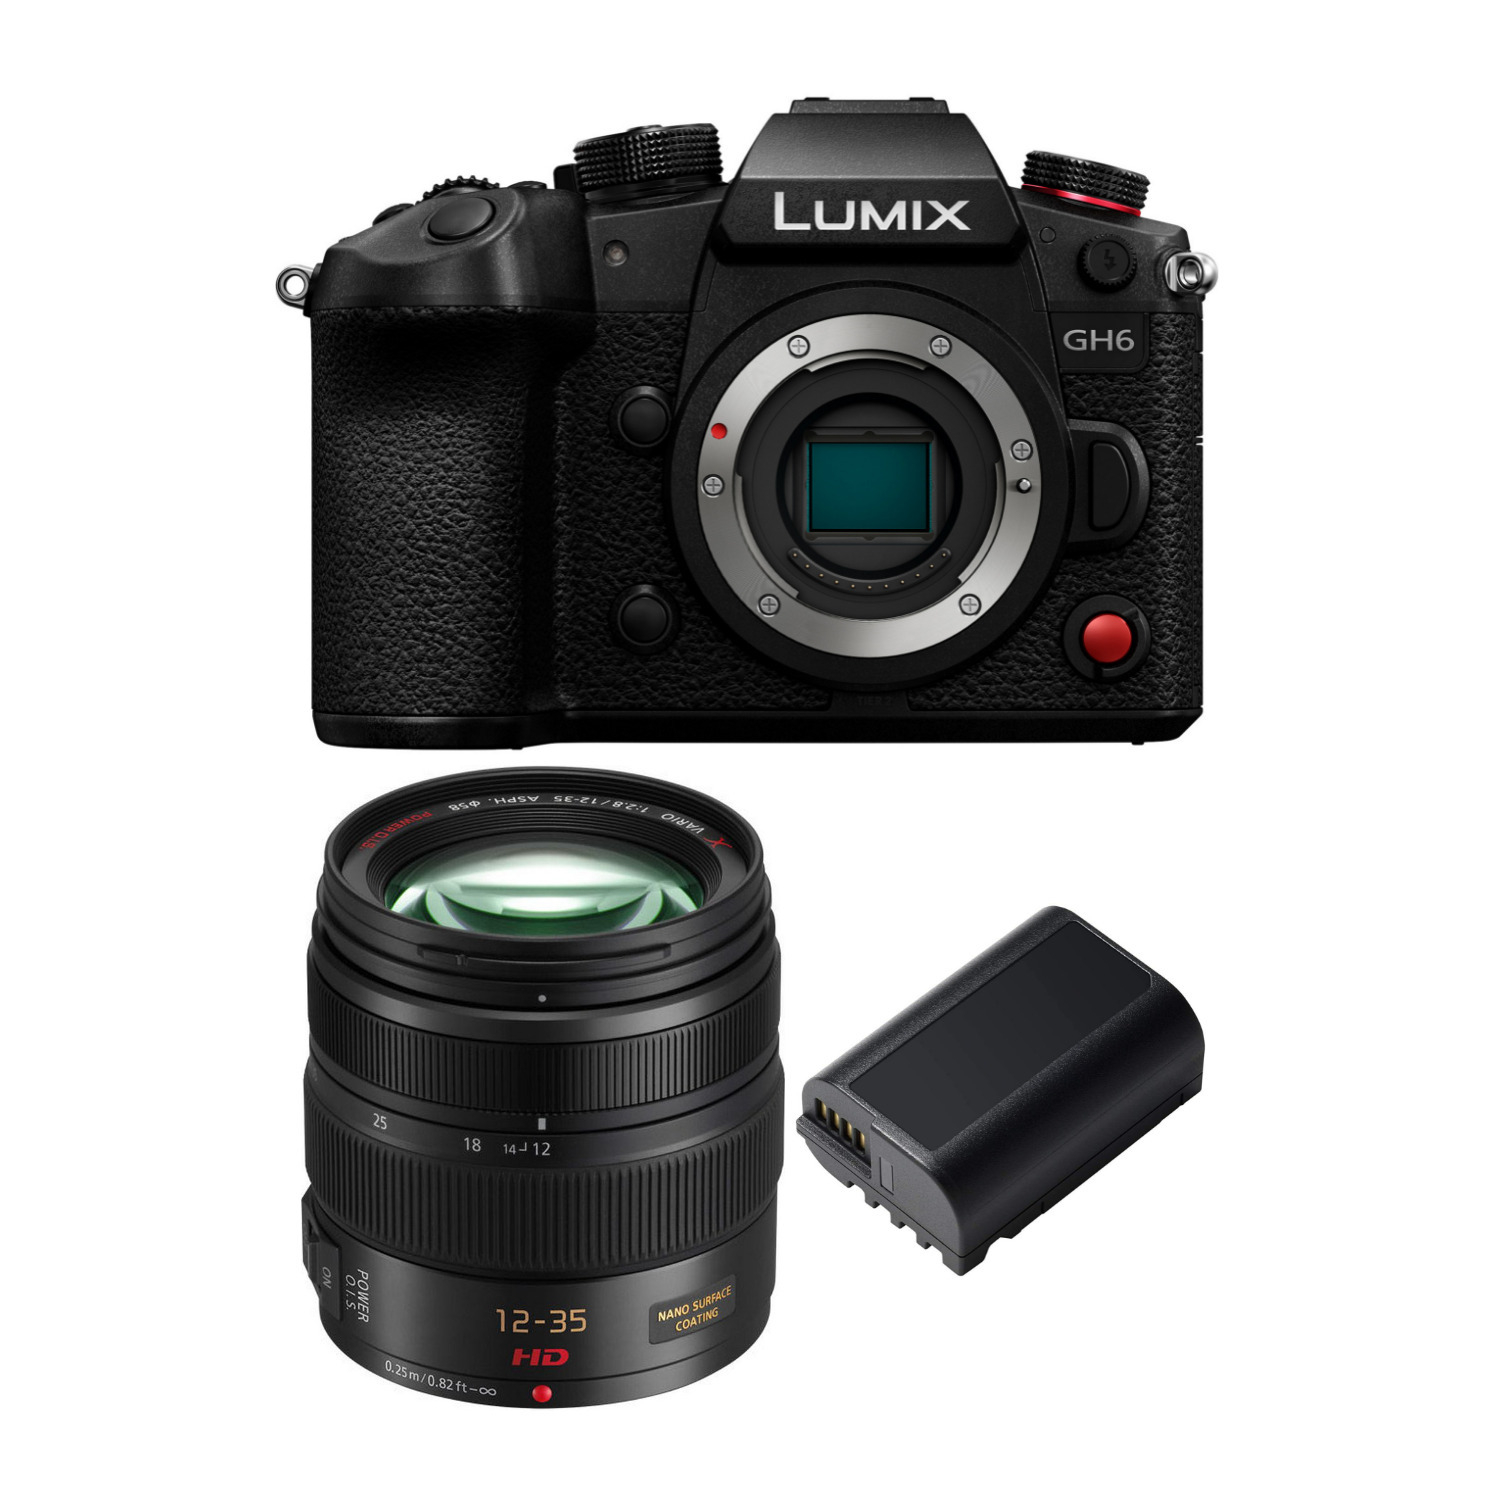 Panasonic LUMIX GH6 Mirrorless Camera Body with Mirrorless Camera Lens and Lithium-Ion Battery Pack in Black